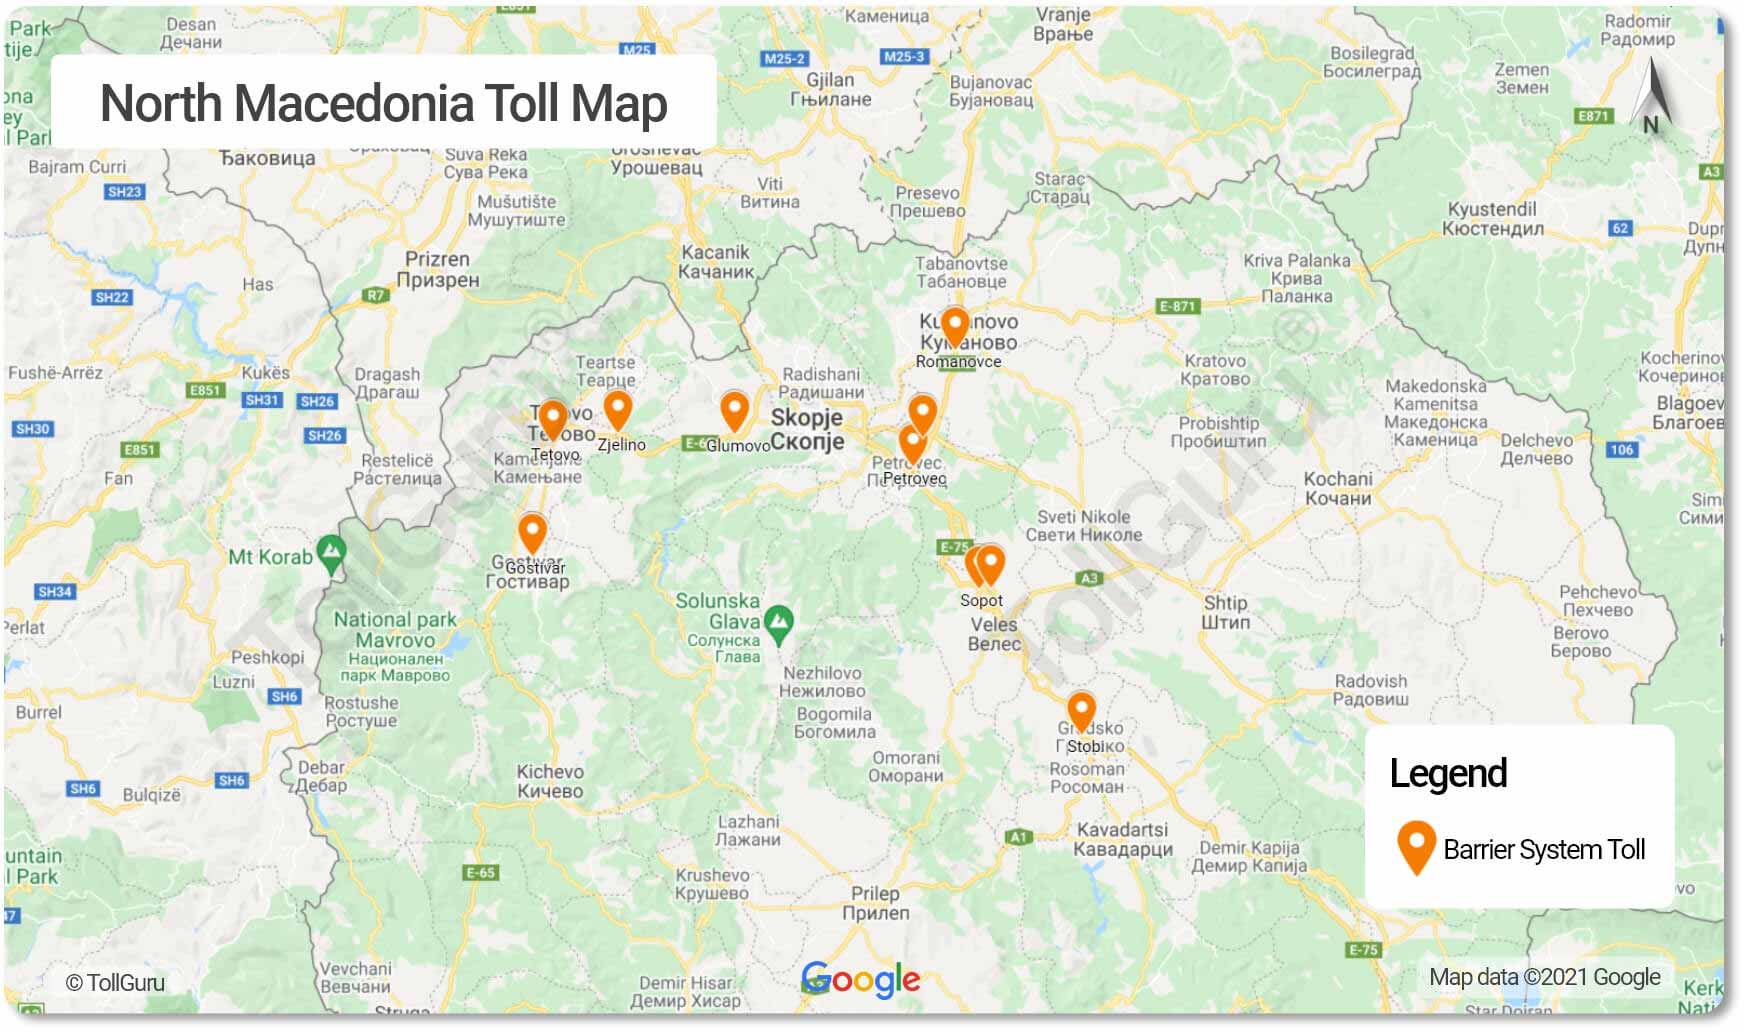 The toll plazas in North Macedonia for all the motorways including A2, A1, and A4 where tolls must be paid in cash only.